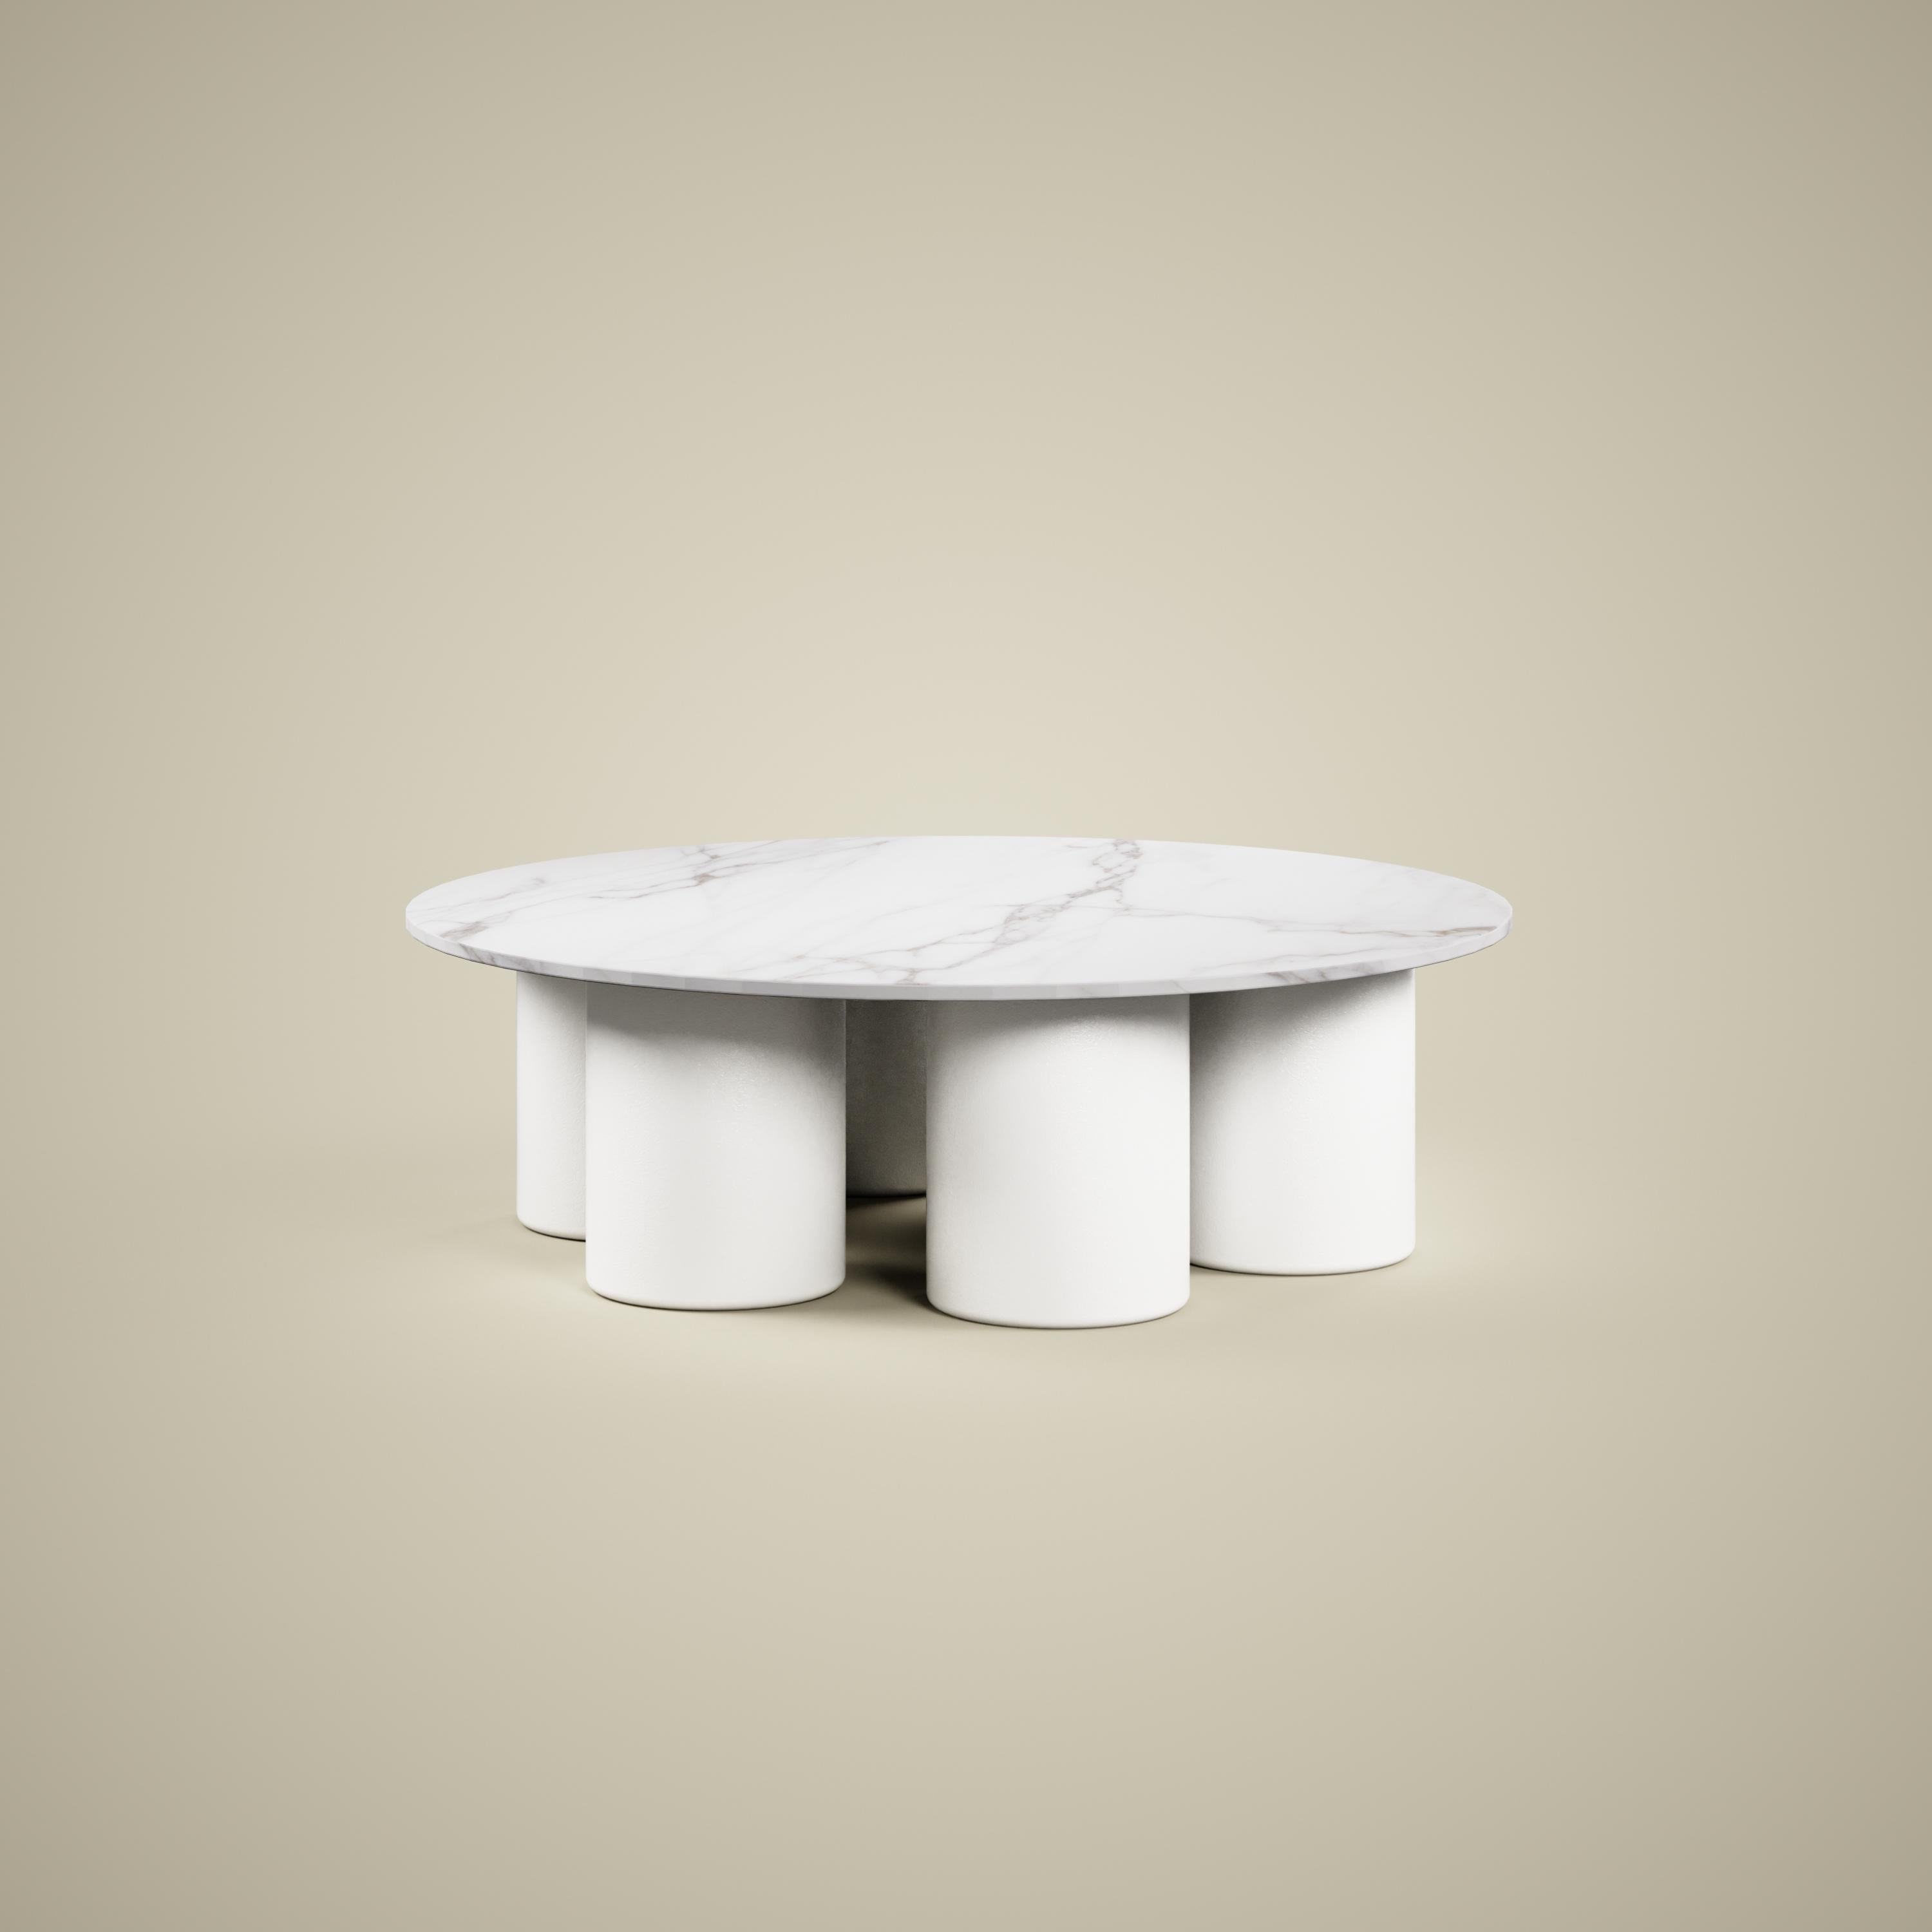 High end round Stainless steel and marble plate coffee table designed by Vincent Mazenauer. The table can be lacquered in all colors (white, black, grey, gold, yellow, red, yellow, blue, etc). 
That table came from the Element coffee table